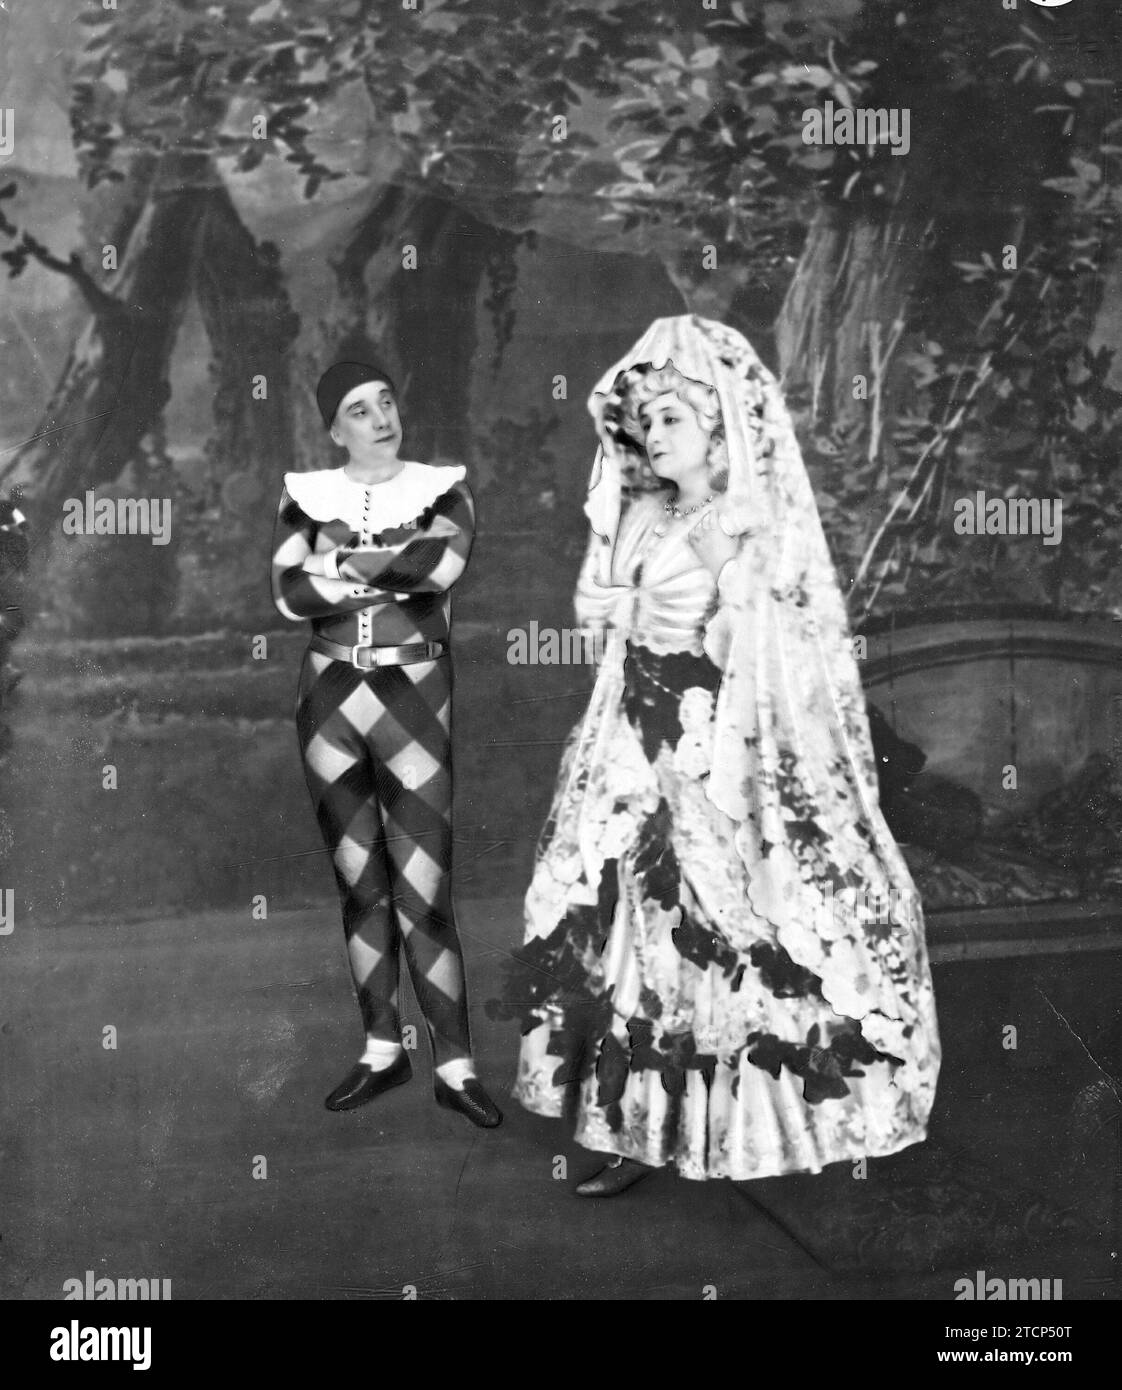 02/29/1912. Premiere coming at the Princess Theater. The Eminent Artists Mrs. Guerrero and Mr. Díaz de Mendoza, in a scene from the Work, original by D. Ramón del Valle-Inclán, 'the Marchioness Rosalinda', which will premiere the day after tomorrow. Credit: Album / Archivo ABC / Ramón Alba Stock Photo